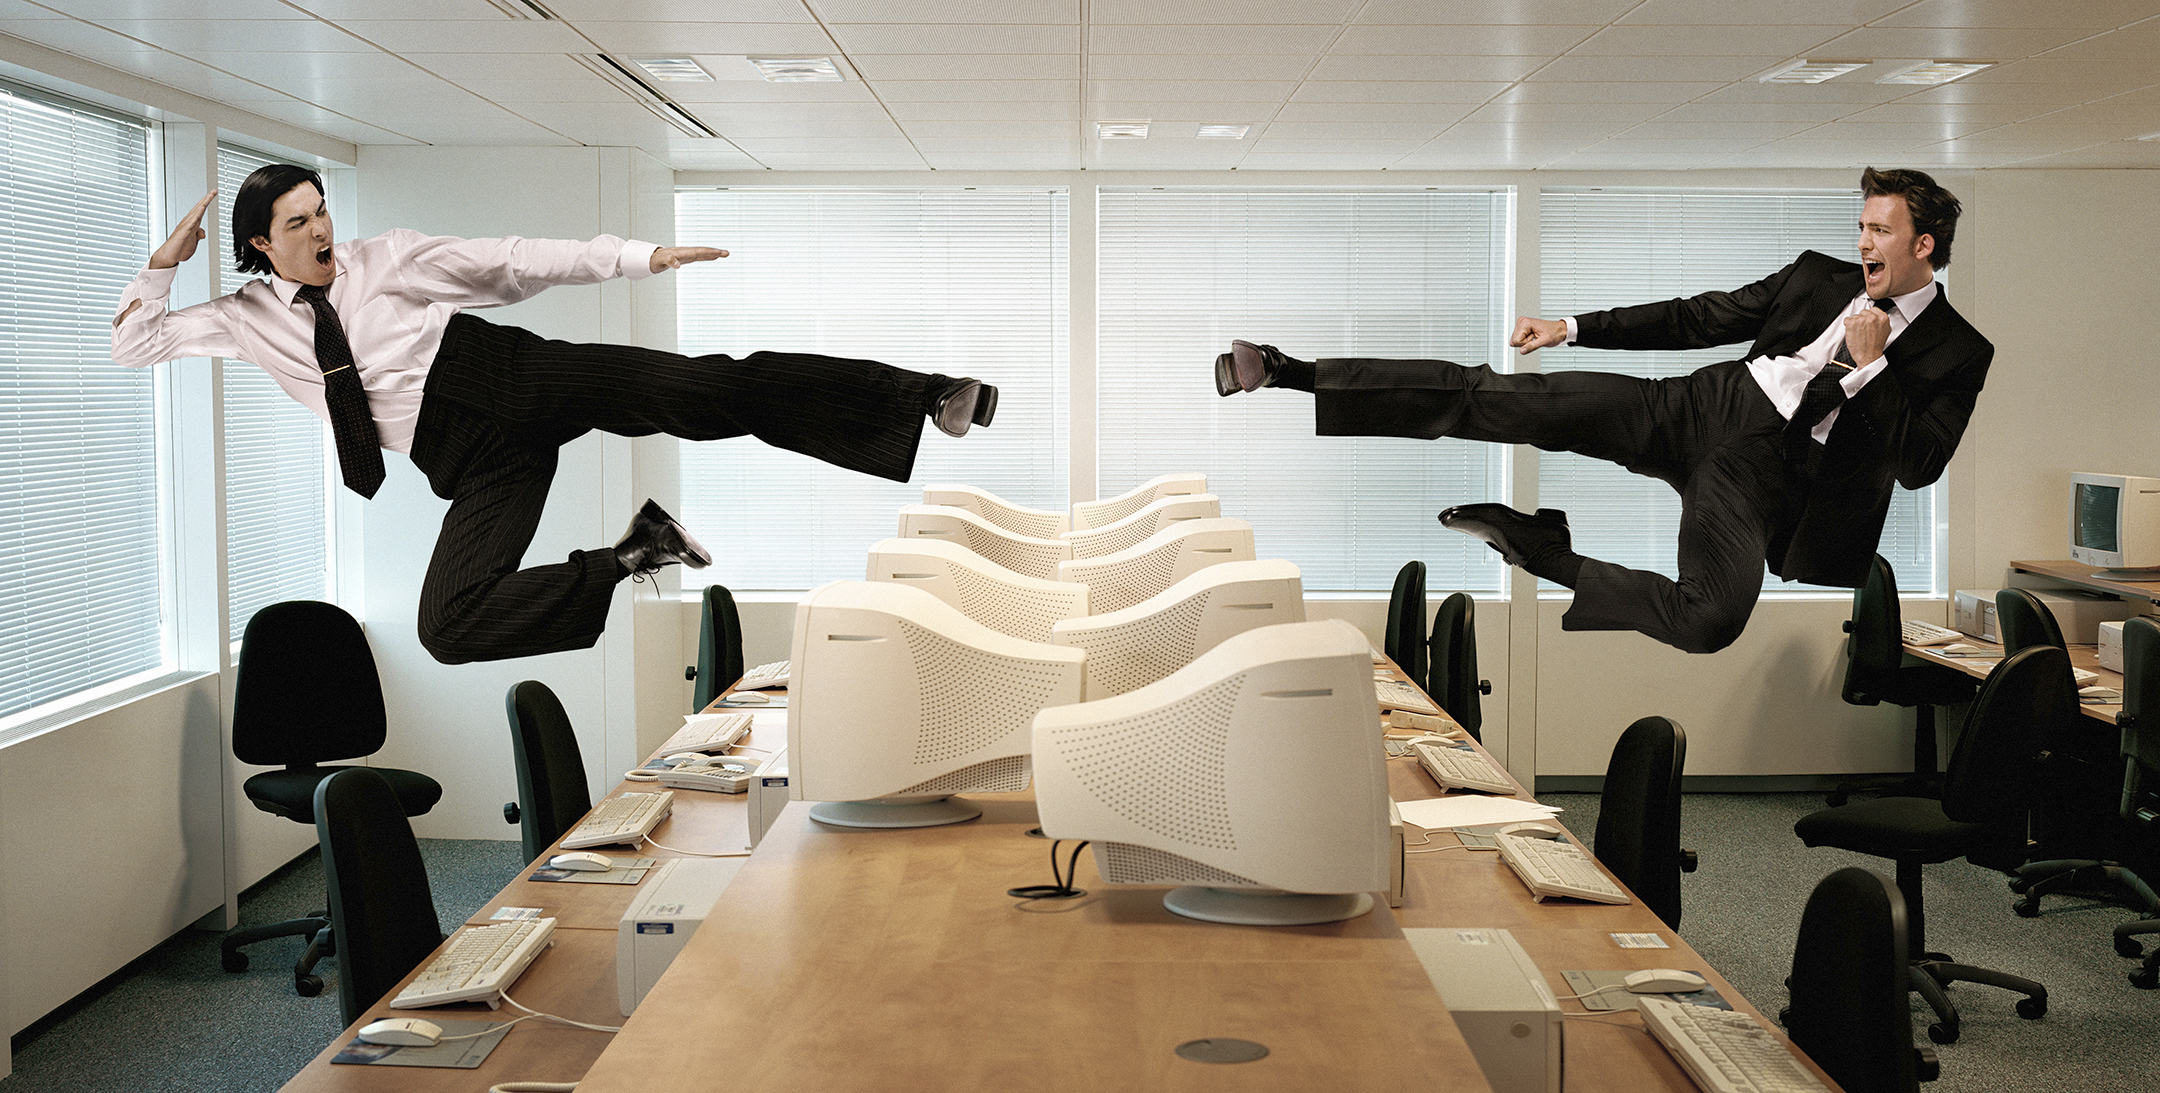 Two men kicking in mid-air across row of computers 